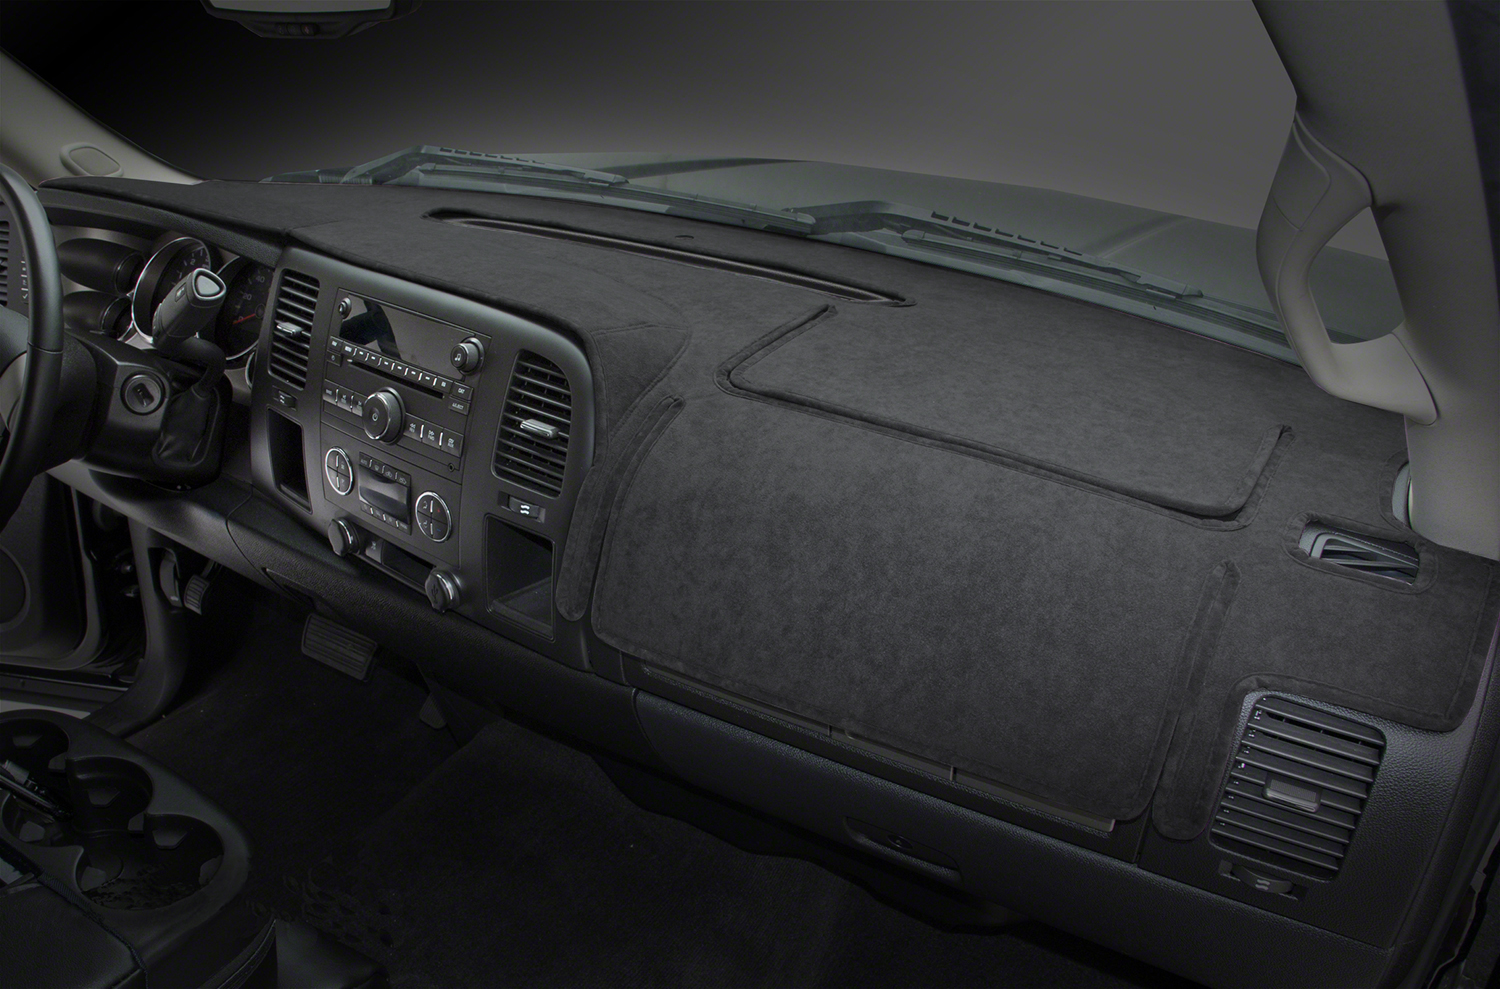 Details about   Fits Jeep Wrangler 2007-2010 Dashtex Dash Board Cover Mat Grey